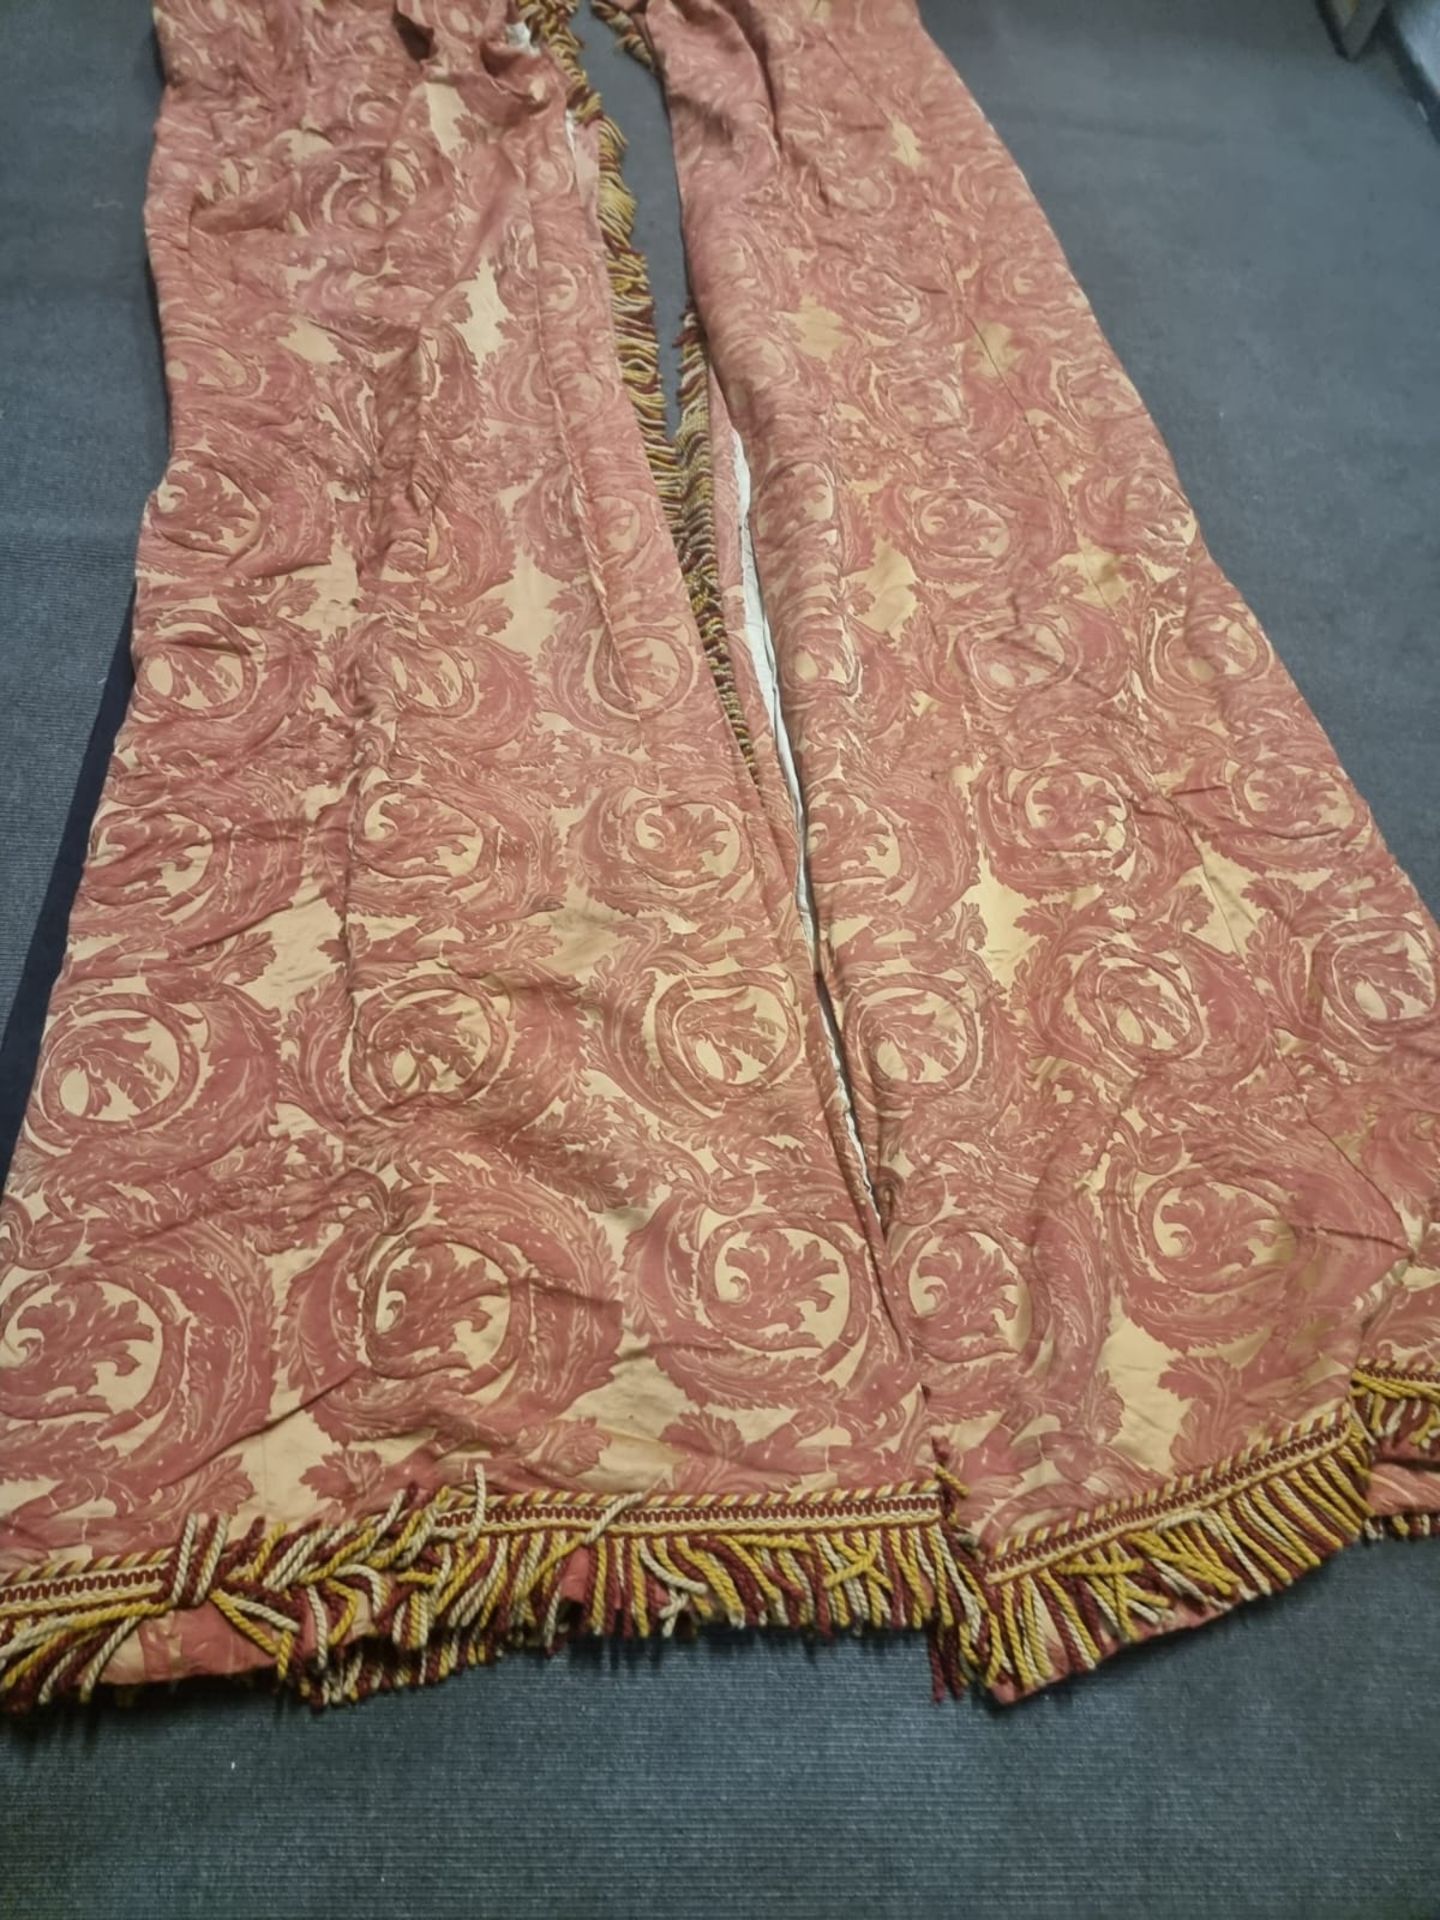 A pair of heavy cotton pencil pleat lined drapes with gold and red pattern with a pelmet top - Image 2 of 6